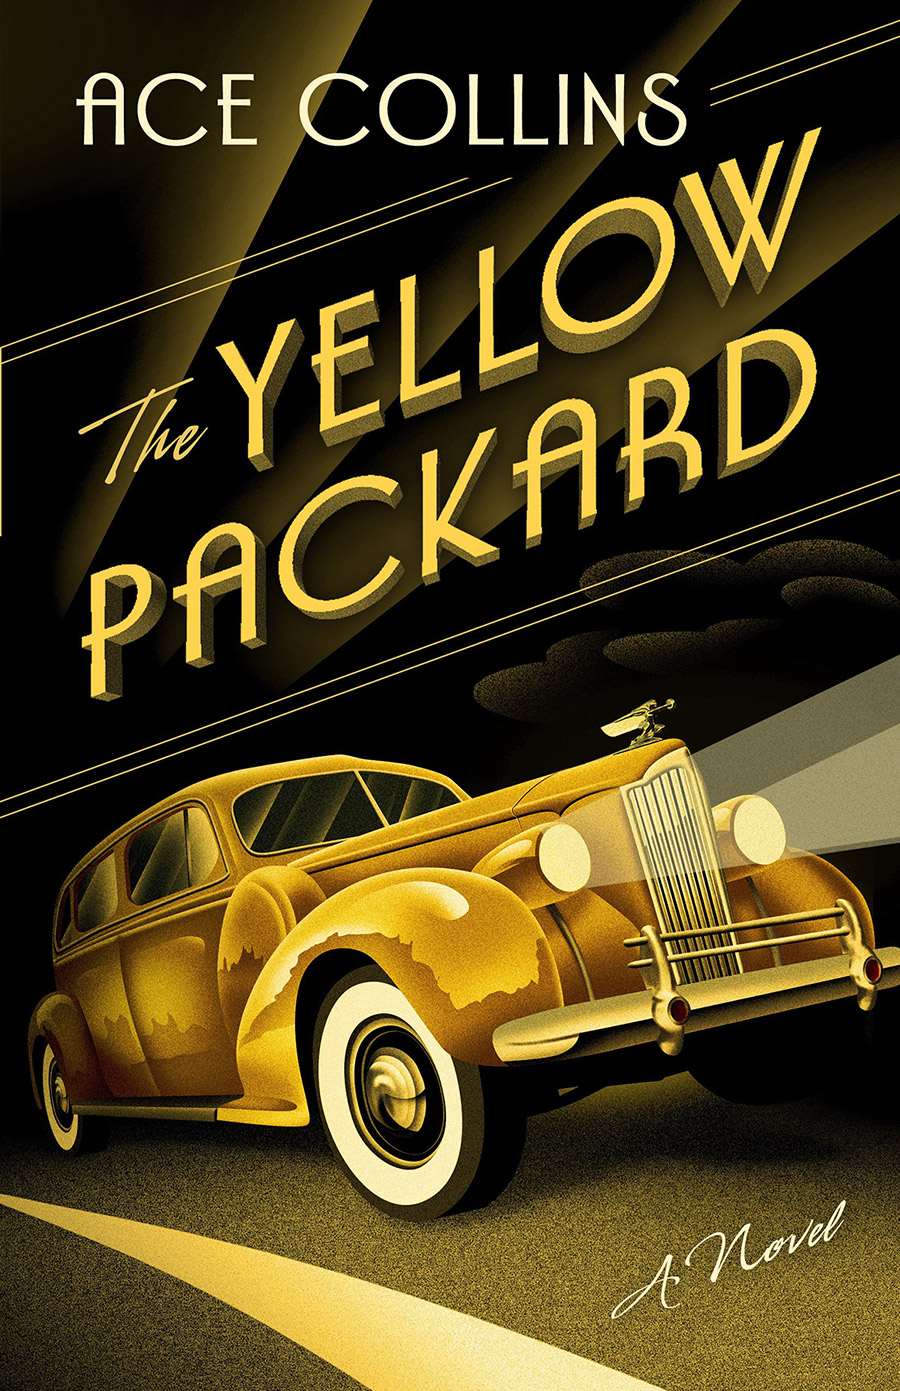 Book cover with white and yellow lettering on black background and golden Packard car